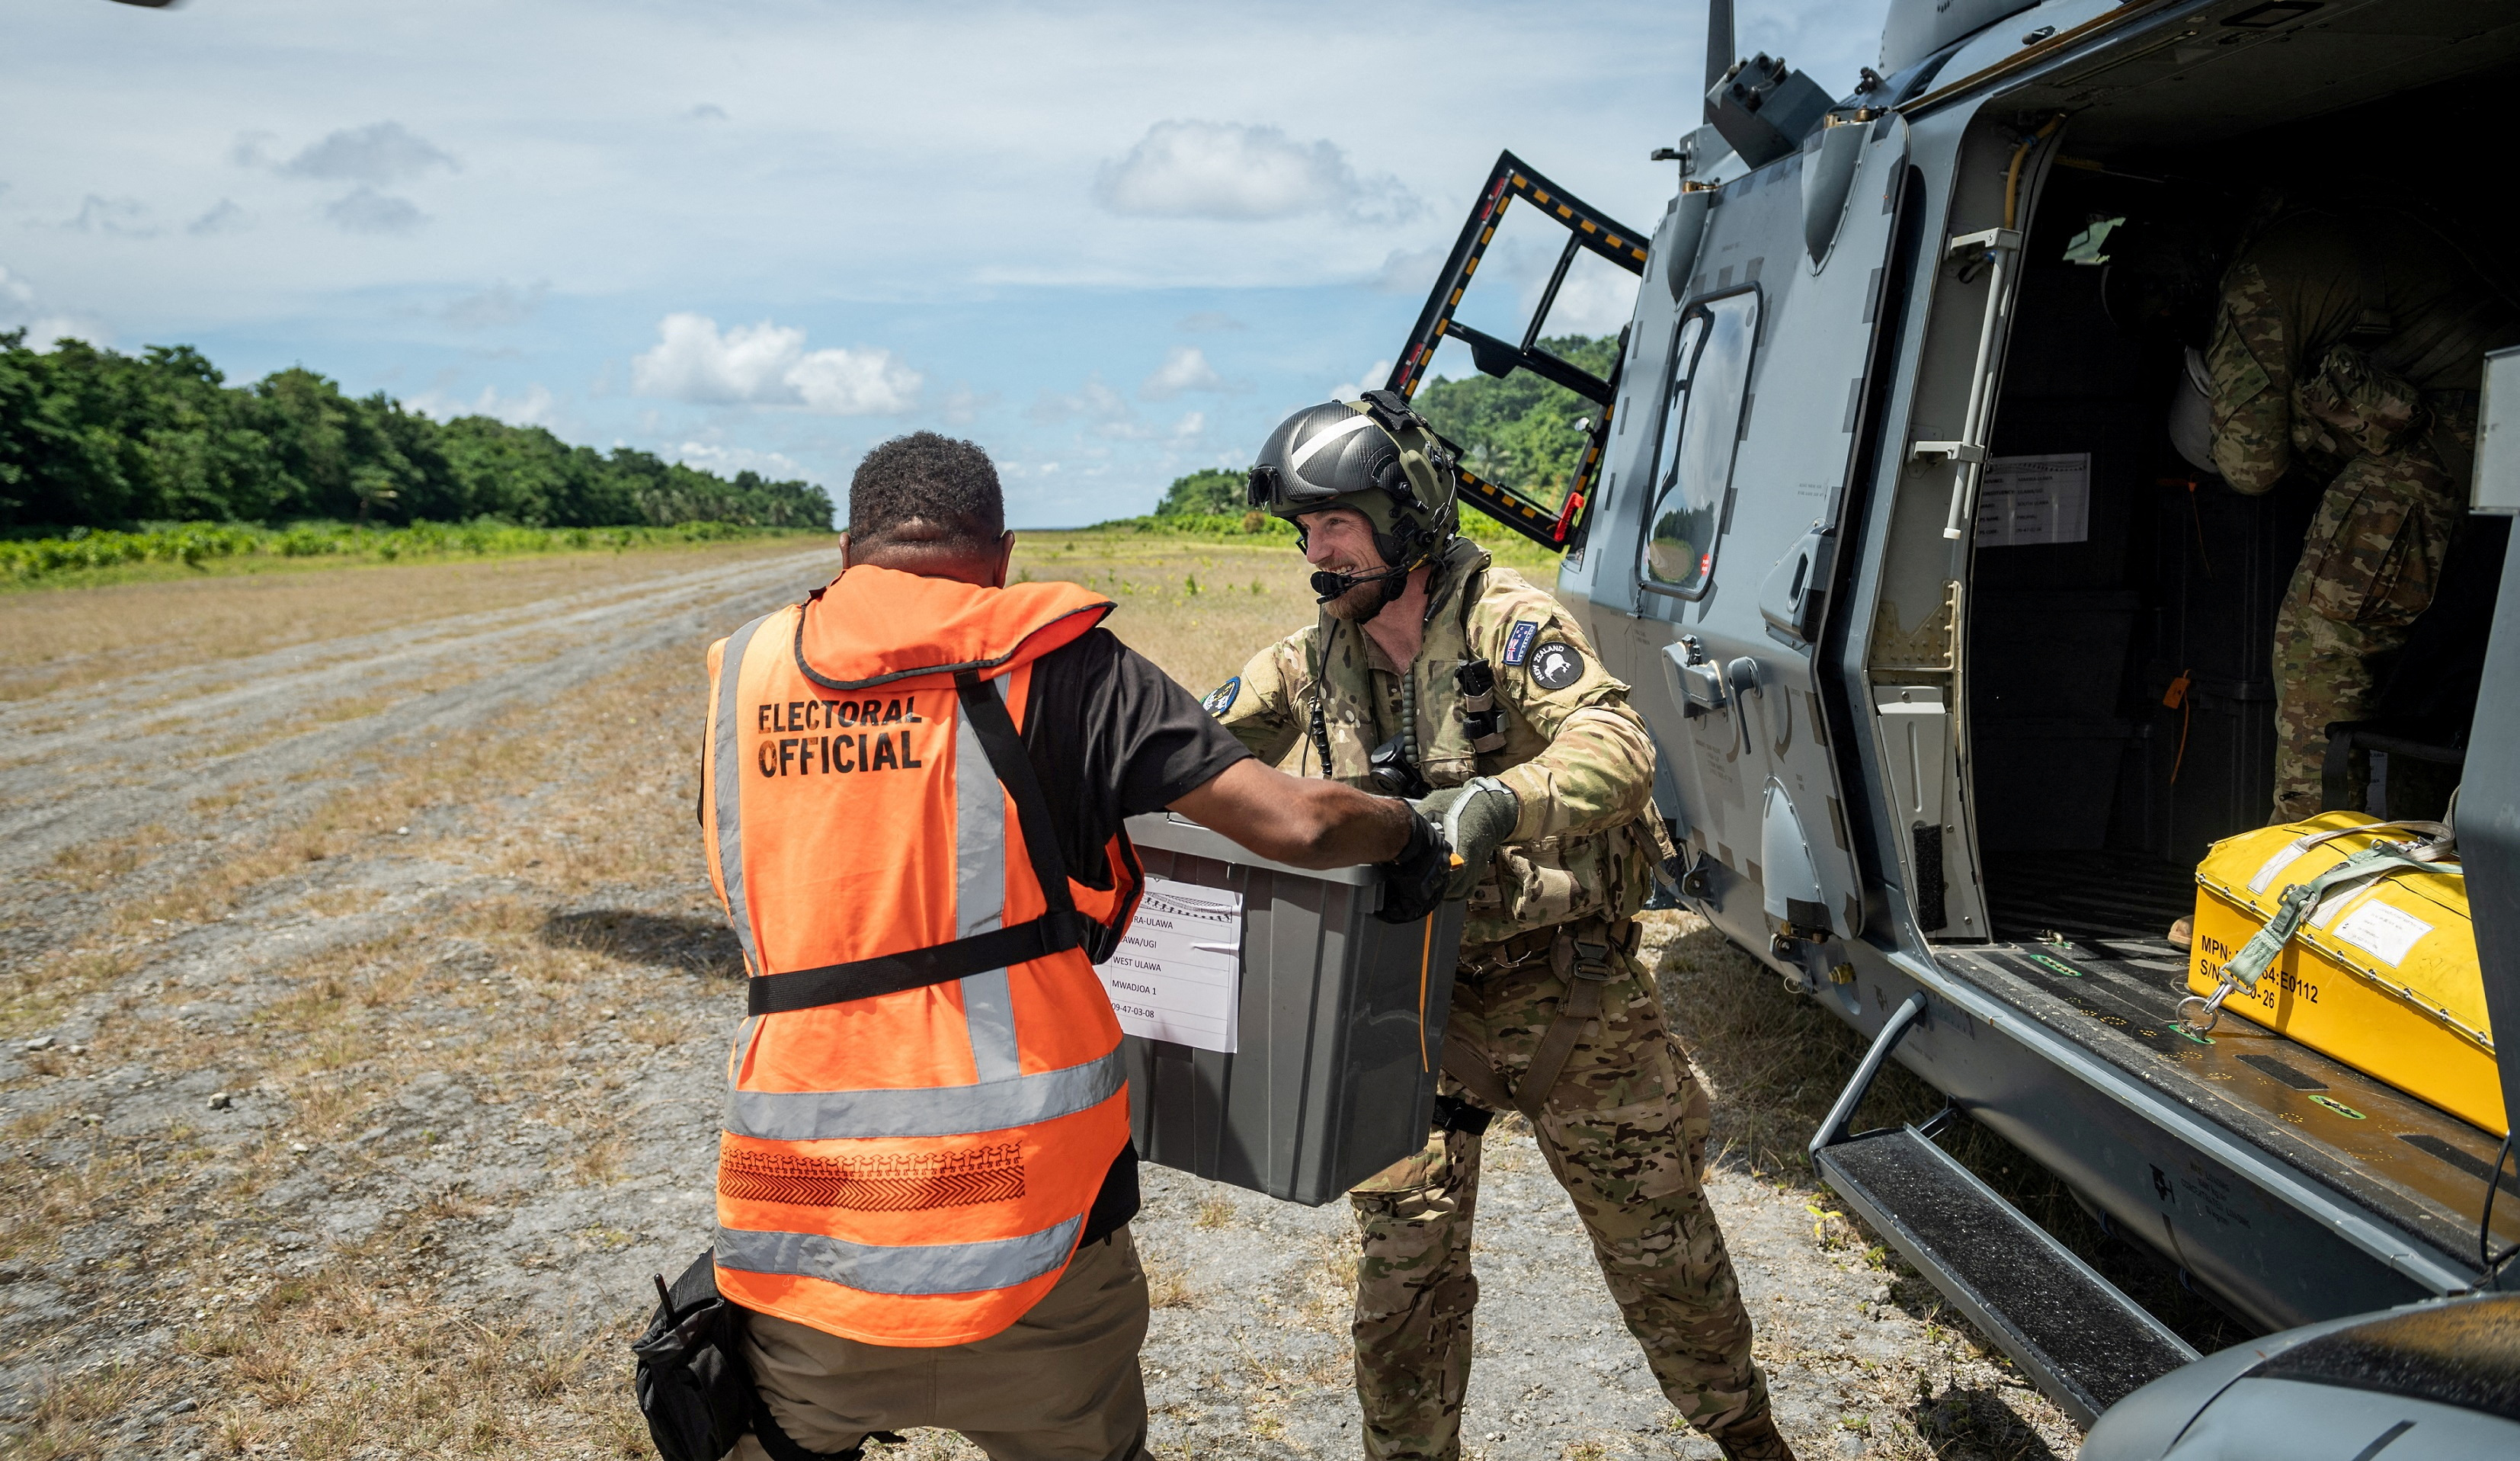 NZDF Joint Task Force assist in delivering ballot boxes to remote areas of the Solomon Islands